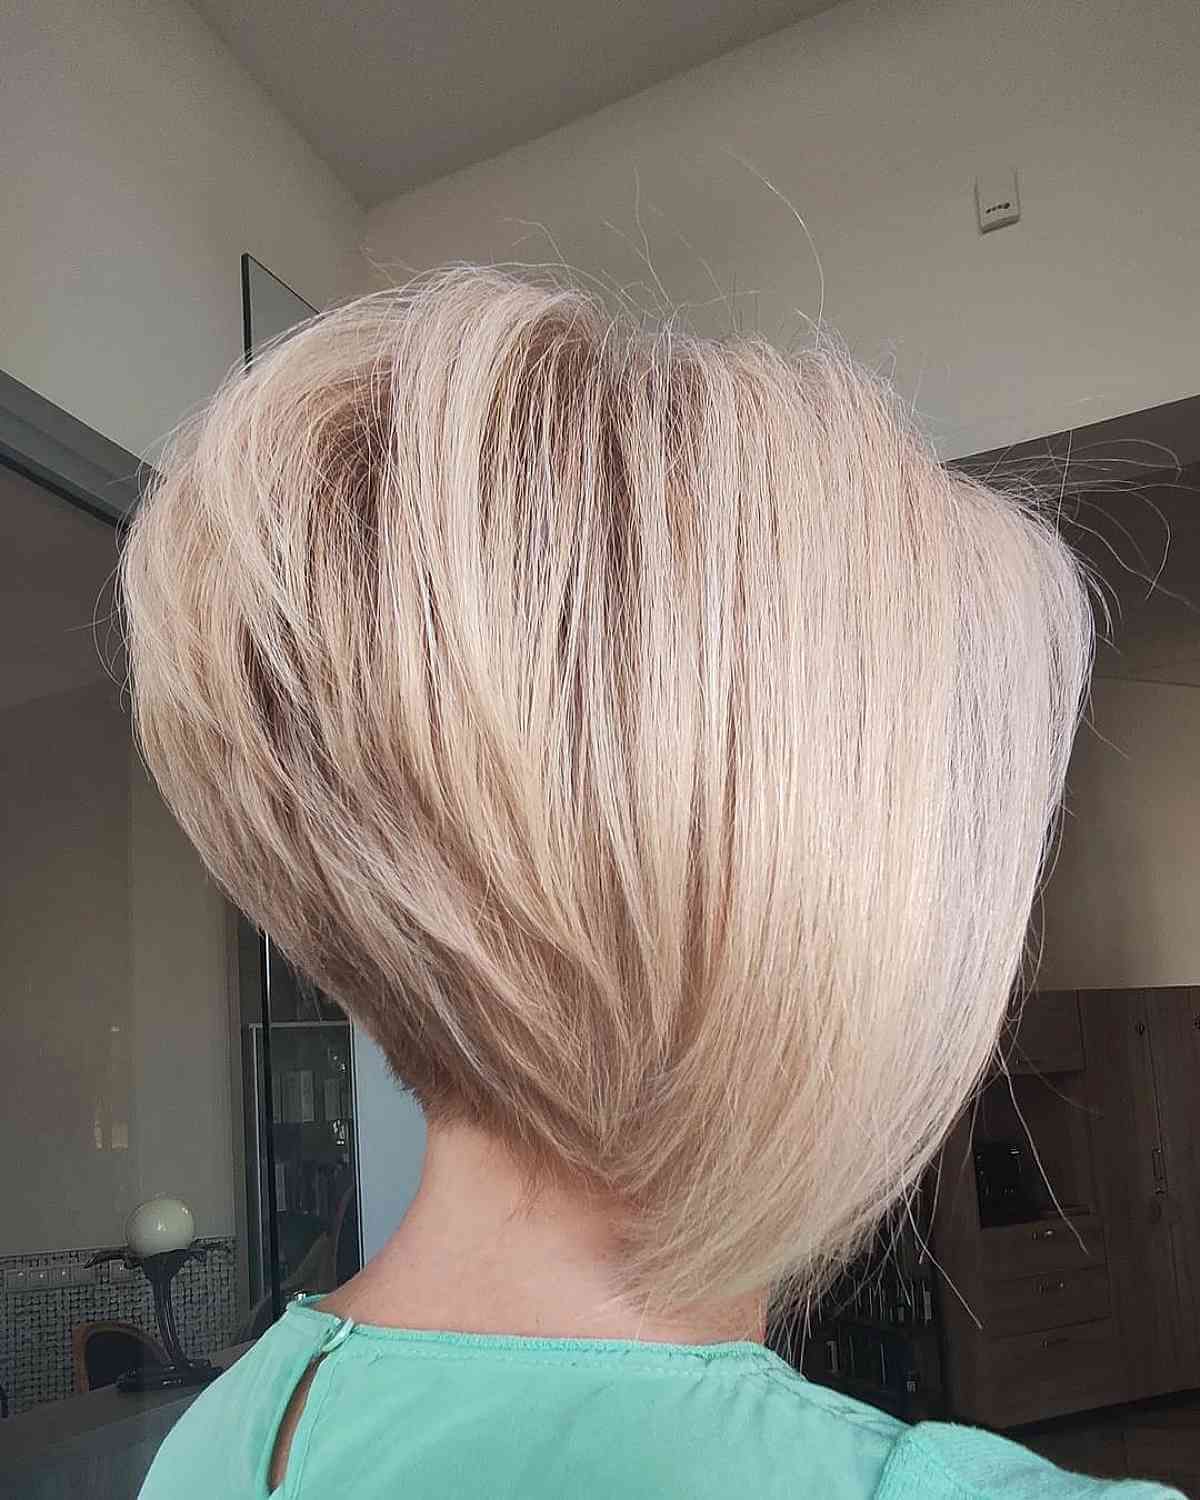 Current Teased Edgy Bob Pertaining To 24 High Stacked, Inverted Bob Haircuts For Edgy, Dramatic Look (View 7 of 20)